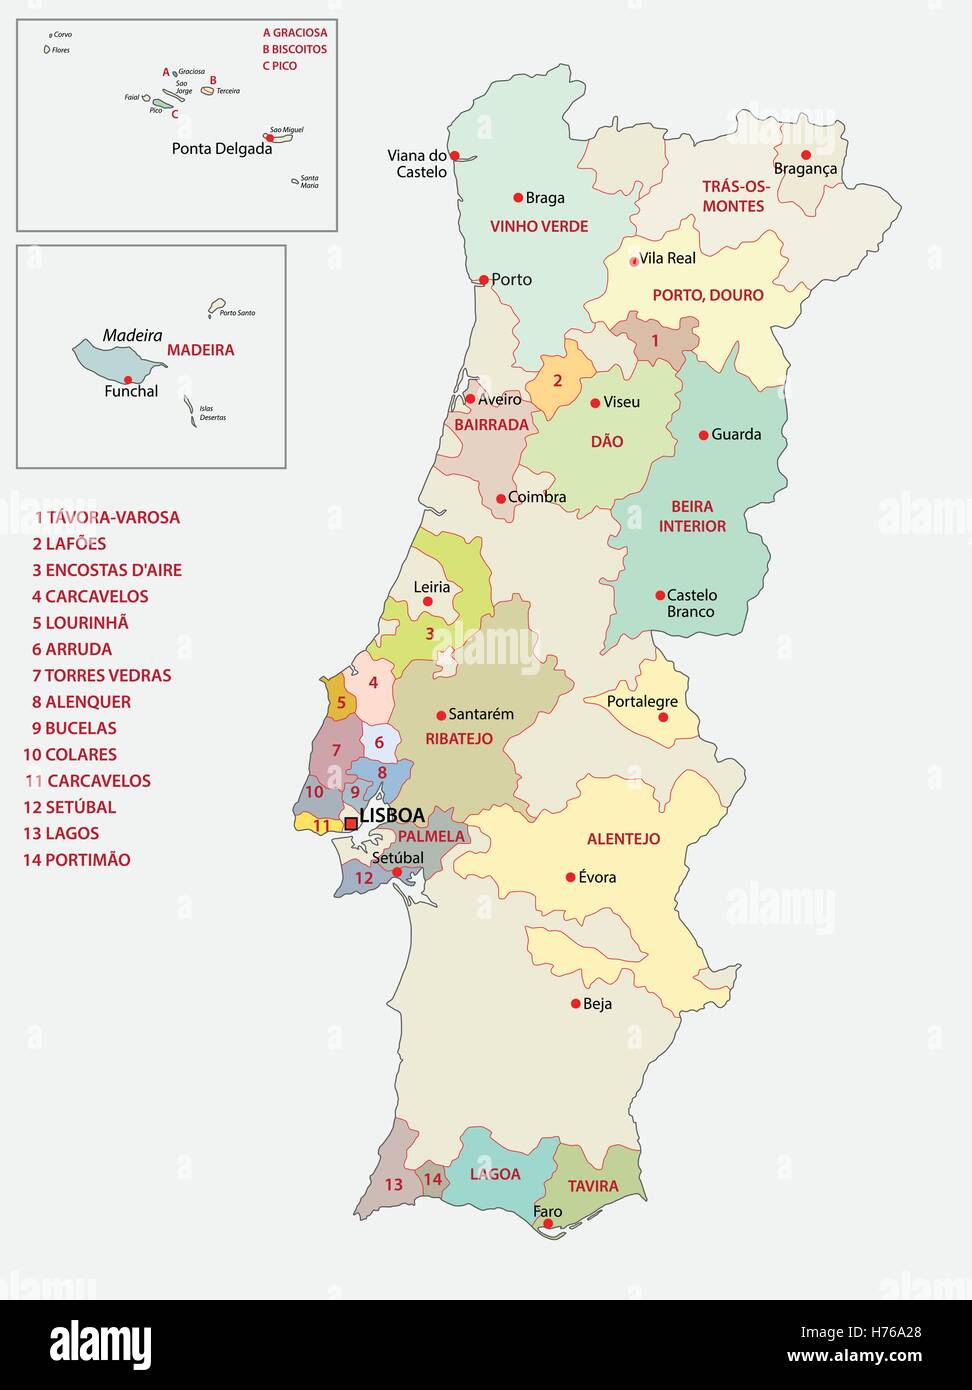 Map Portugal Divided By Districts Madeira 库存矢量图（免版税）1939927984